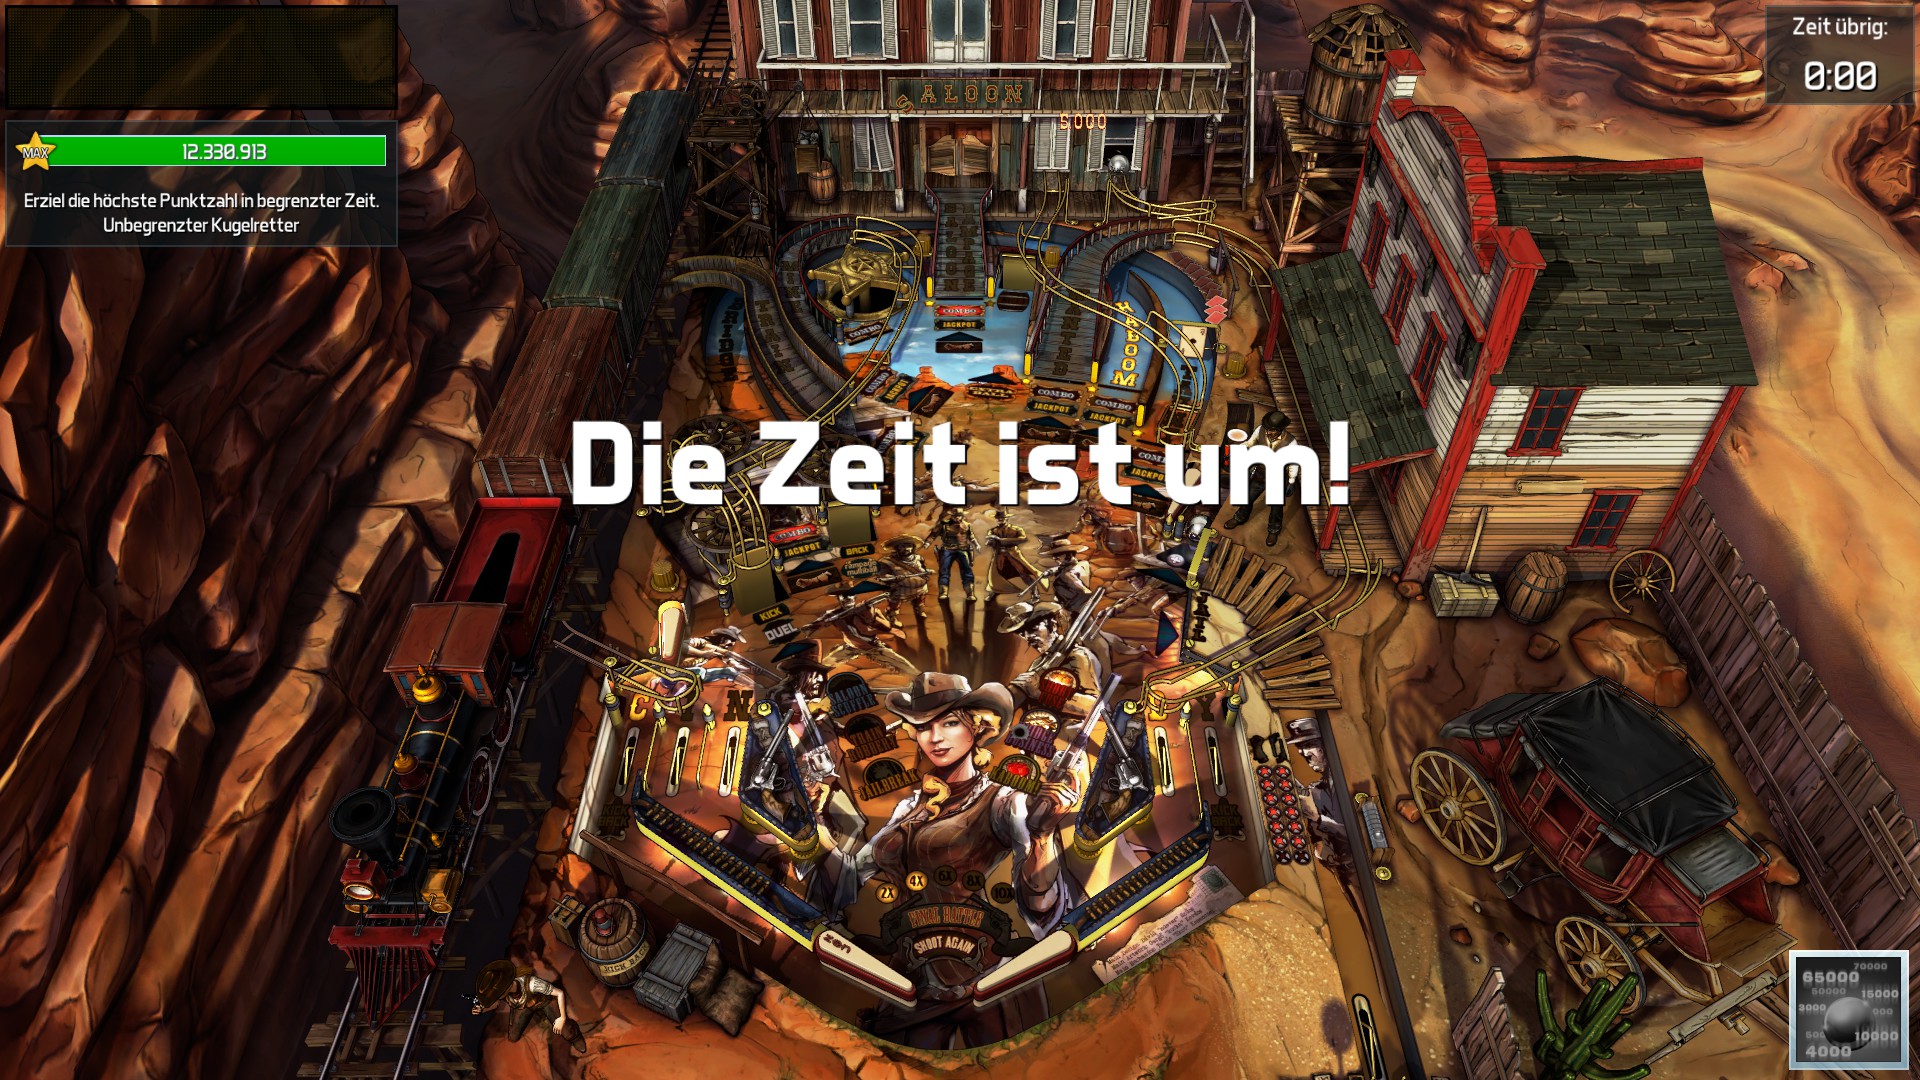 e2e4: Pinball FX3: Wild West Rampage [5 Minute] (PC) 12,330,913 points on 2022-06-06 04:03:02